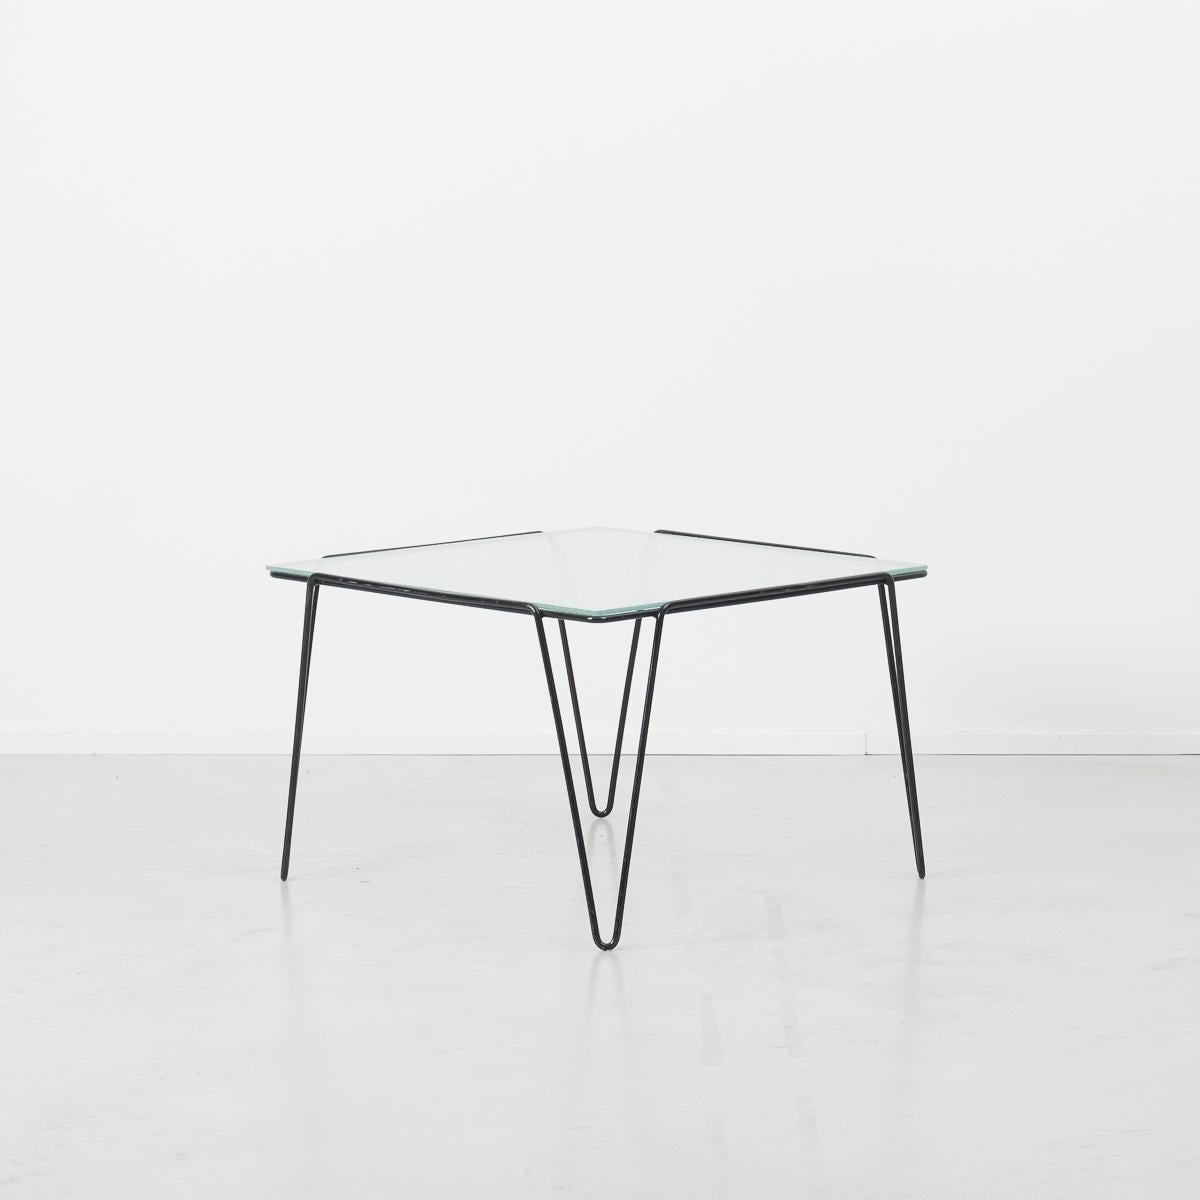 This super Minimalist glass coffee table was designed by Arnold Bueno de Mesquita for Groos, Holland in 1955. Made from enamelled steel rod and safety glass. A very important piece of Dutch modern design. Minor scuffs to the frame, otherwise good